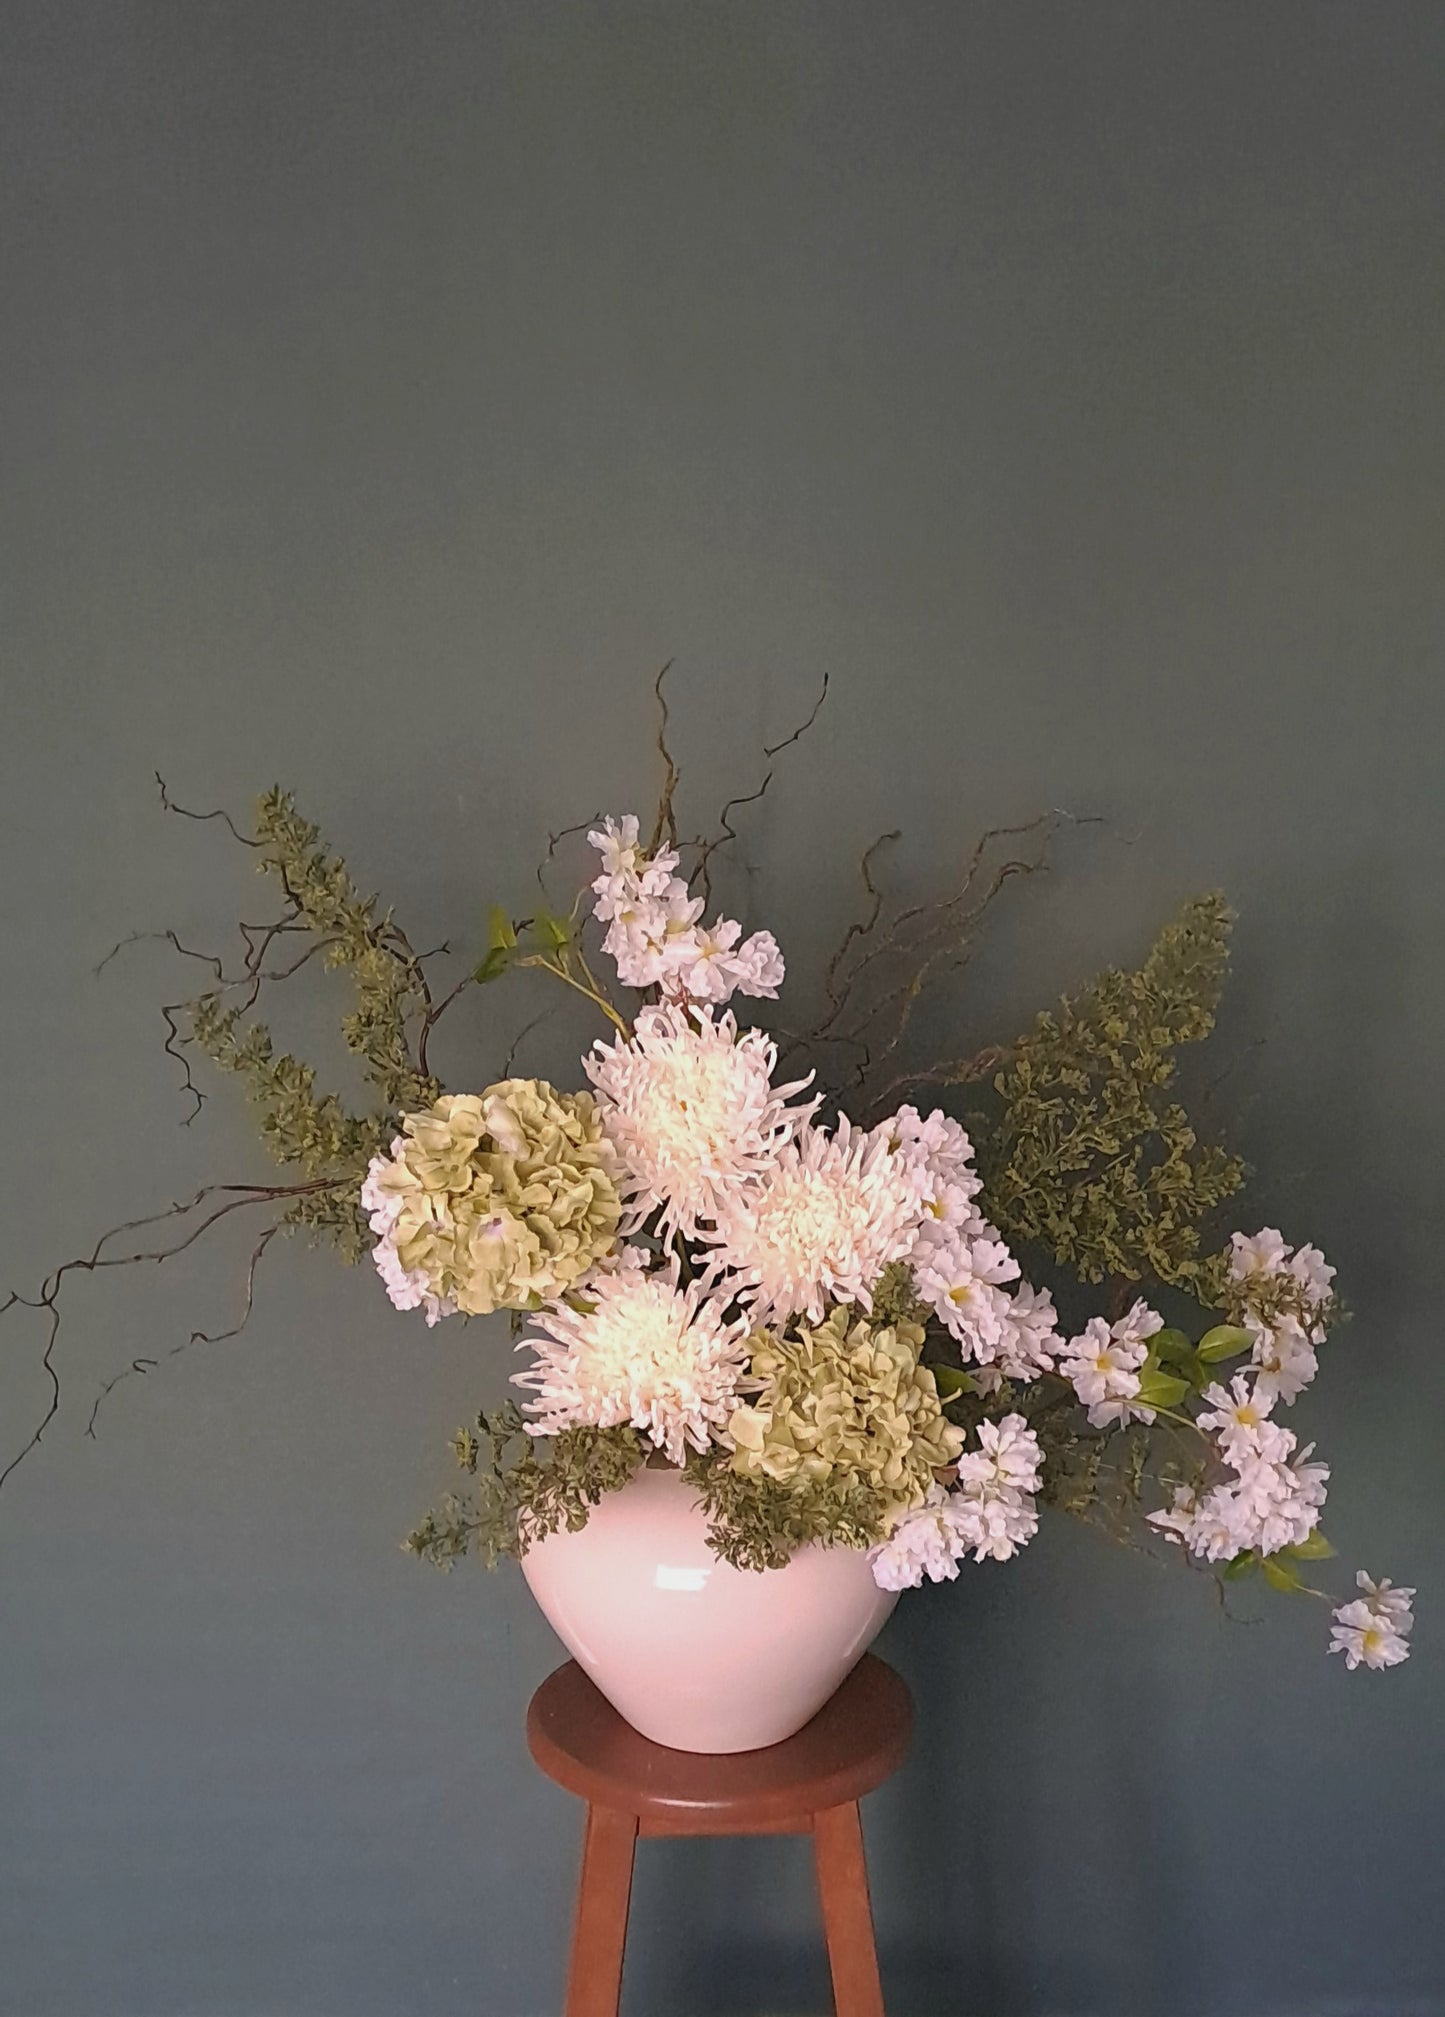 Large seeded stem, Faux floral stems, artificial flowers, willow stems, branches for vase, flower arrangement, floral arrangement, flowers for large vase.